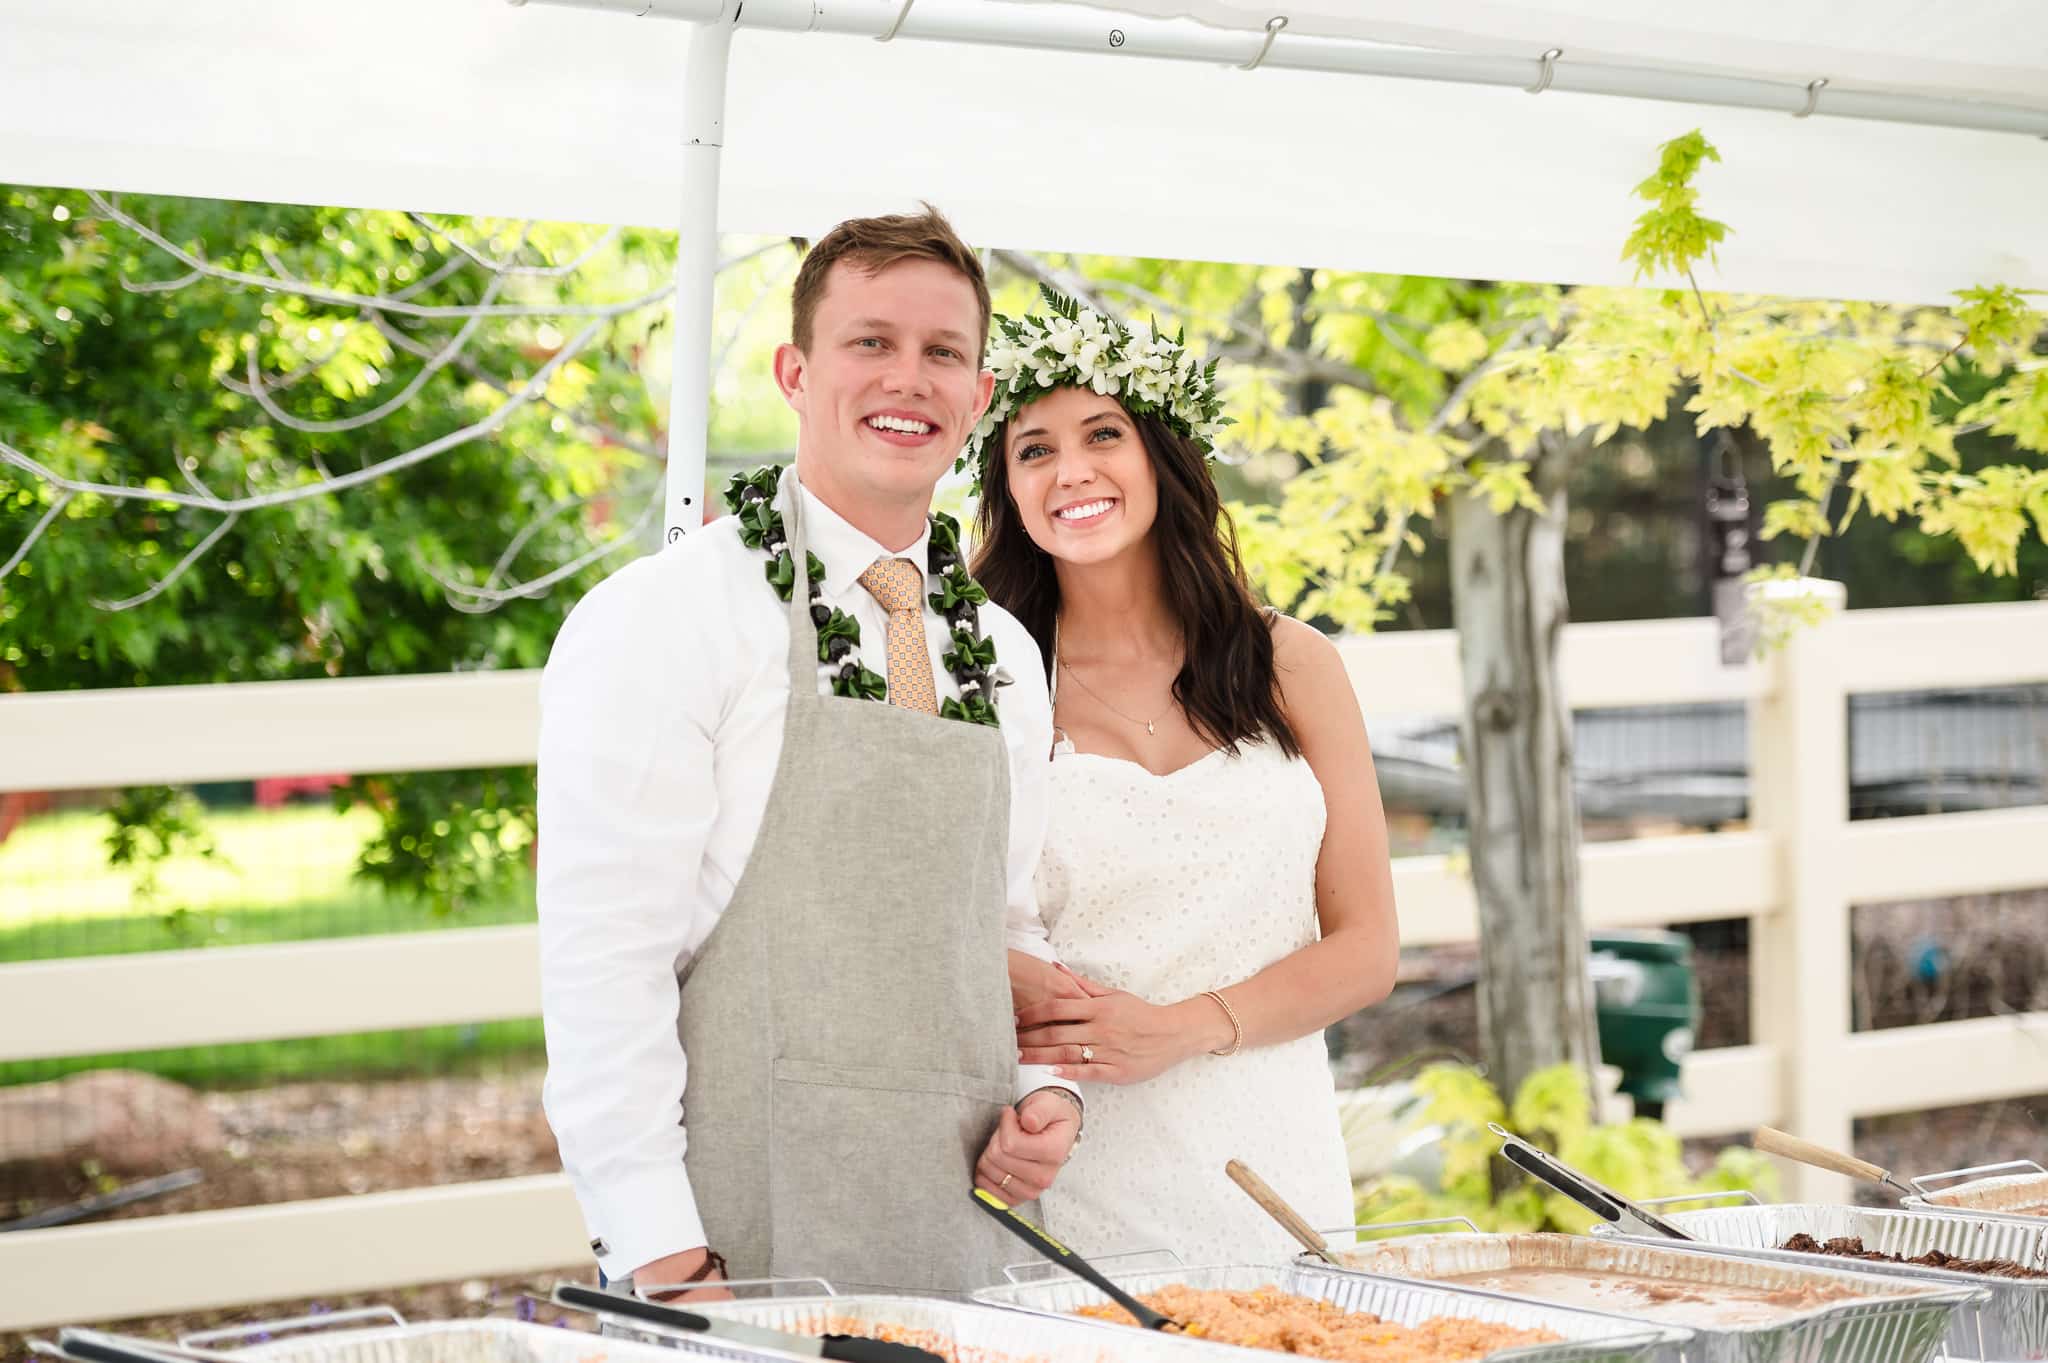 The bride and groom wear aprons over their wedding attire and are ready to serve their guests food from their buffet.